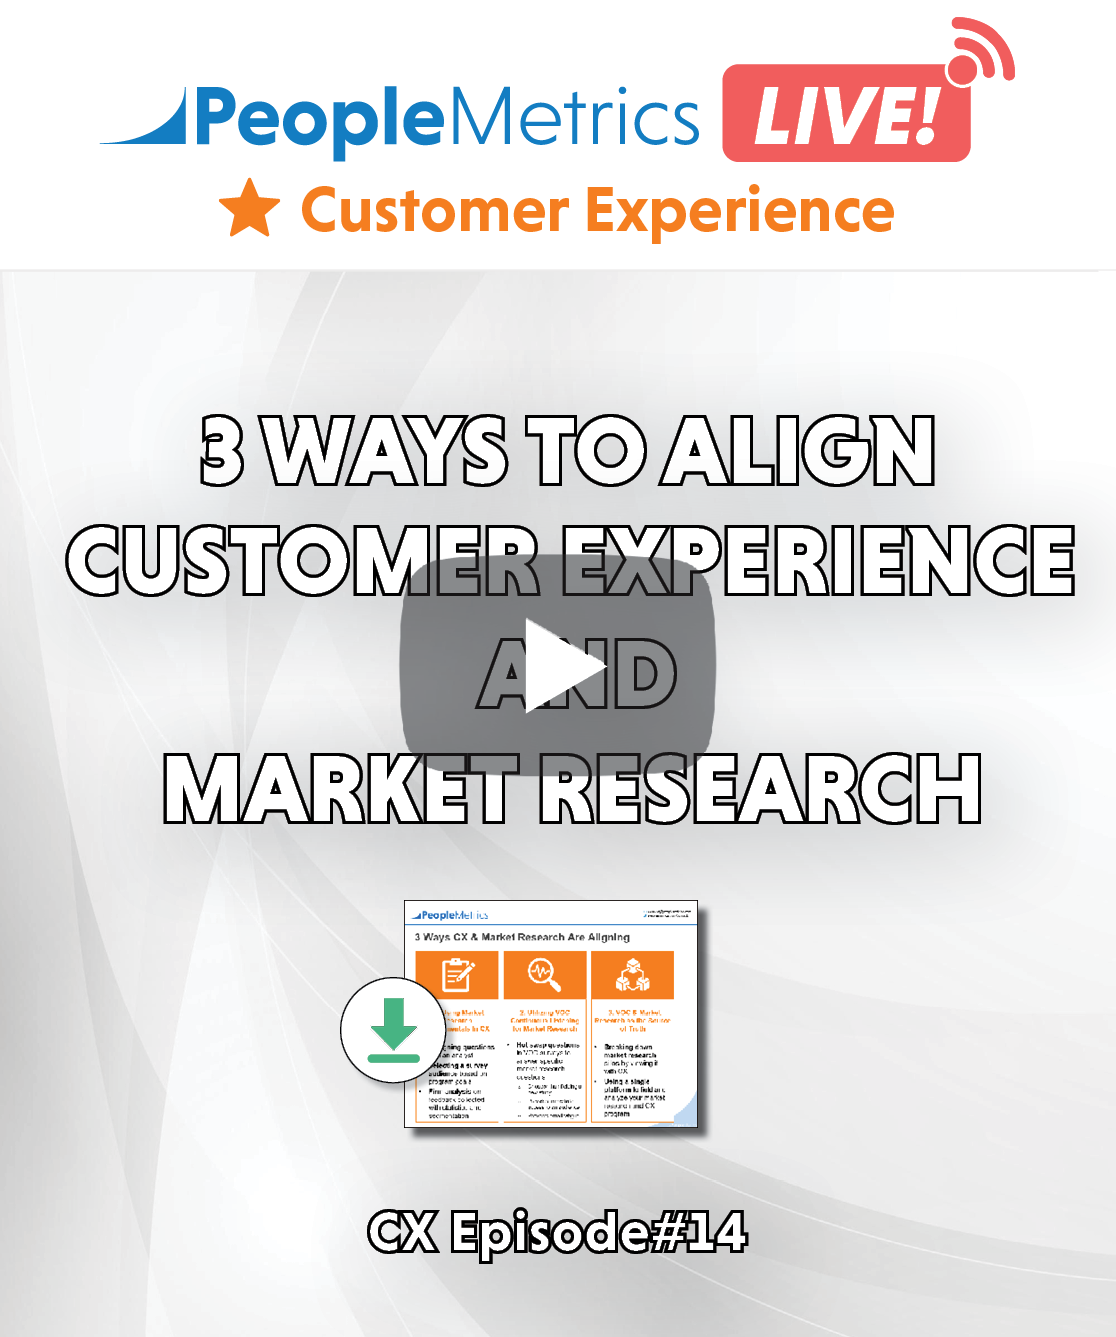 WATCH NOW: 3 Ways to Align Customer Experience & Market Research